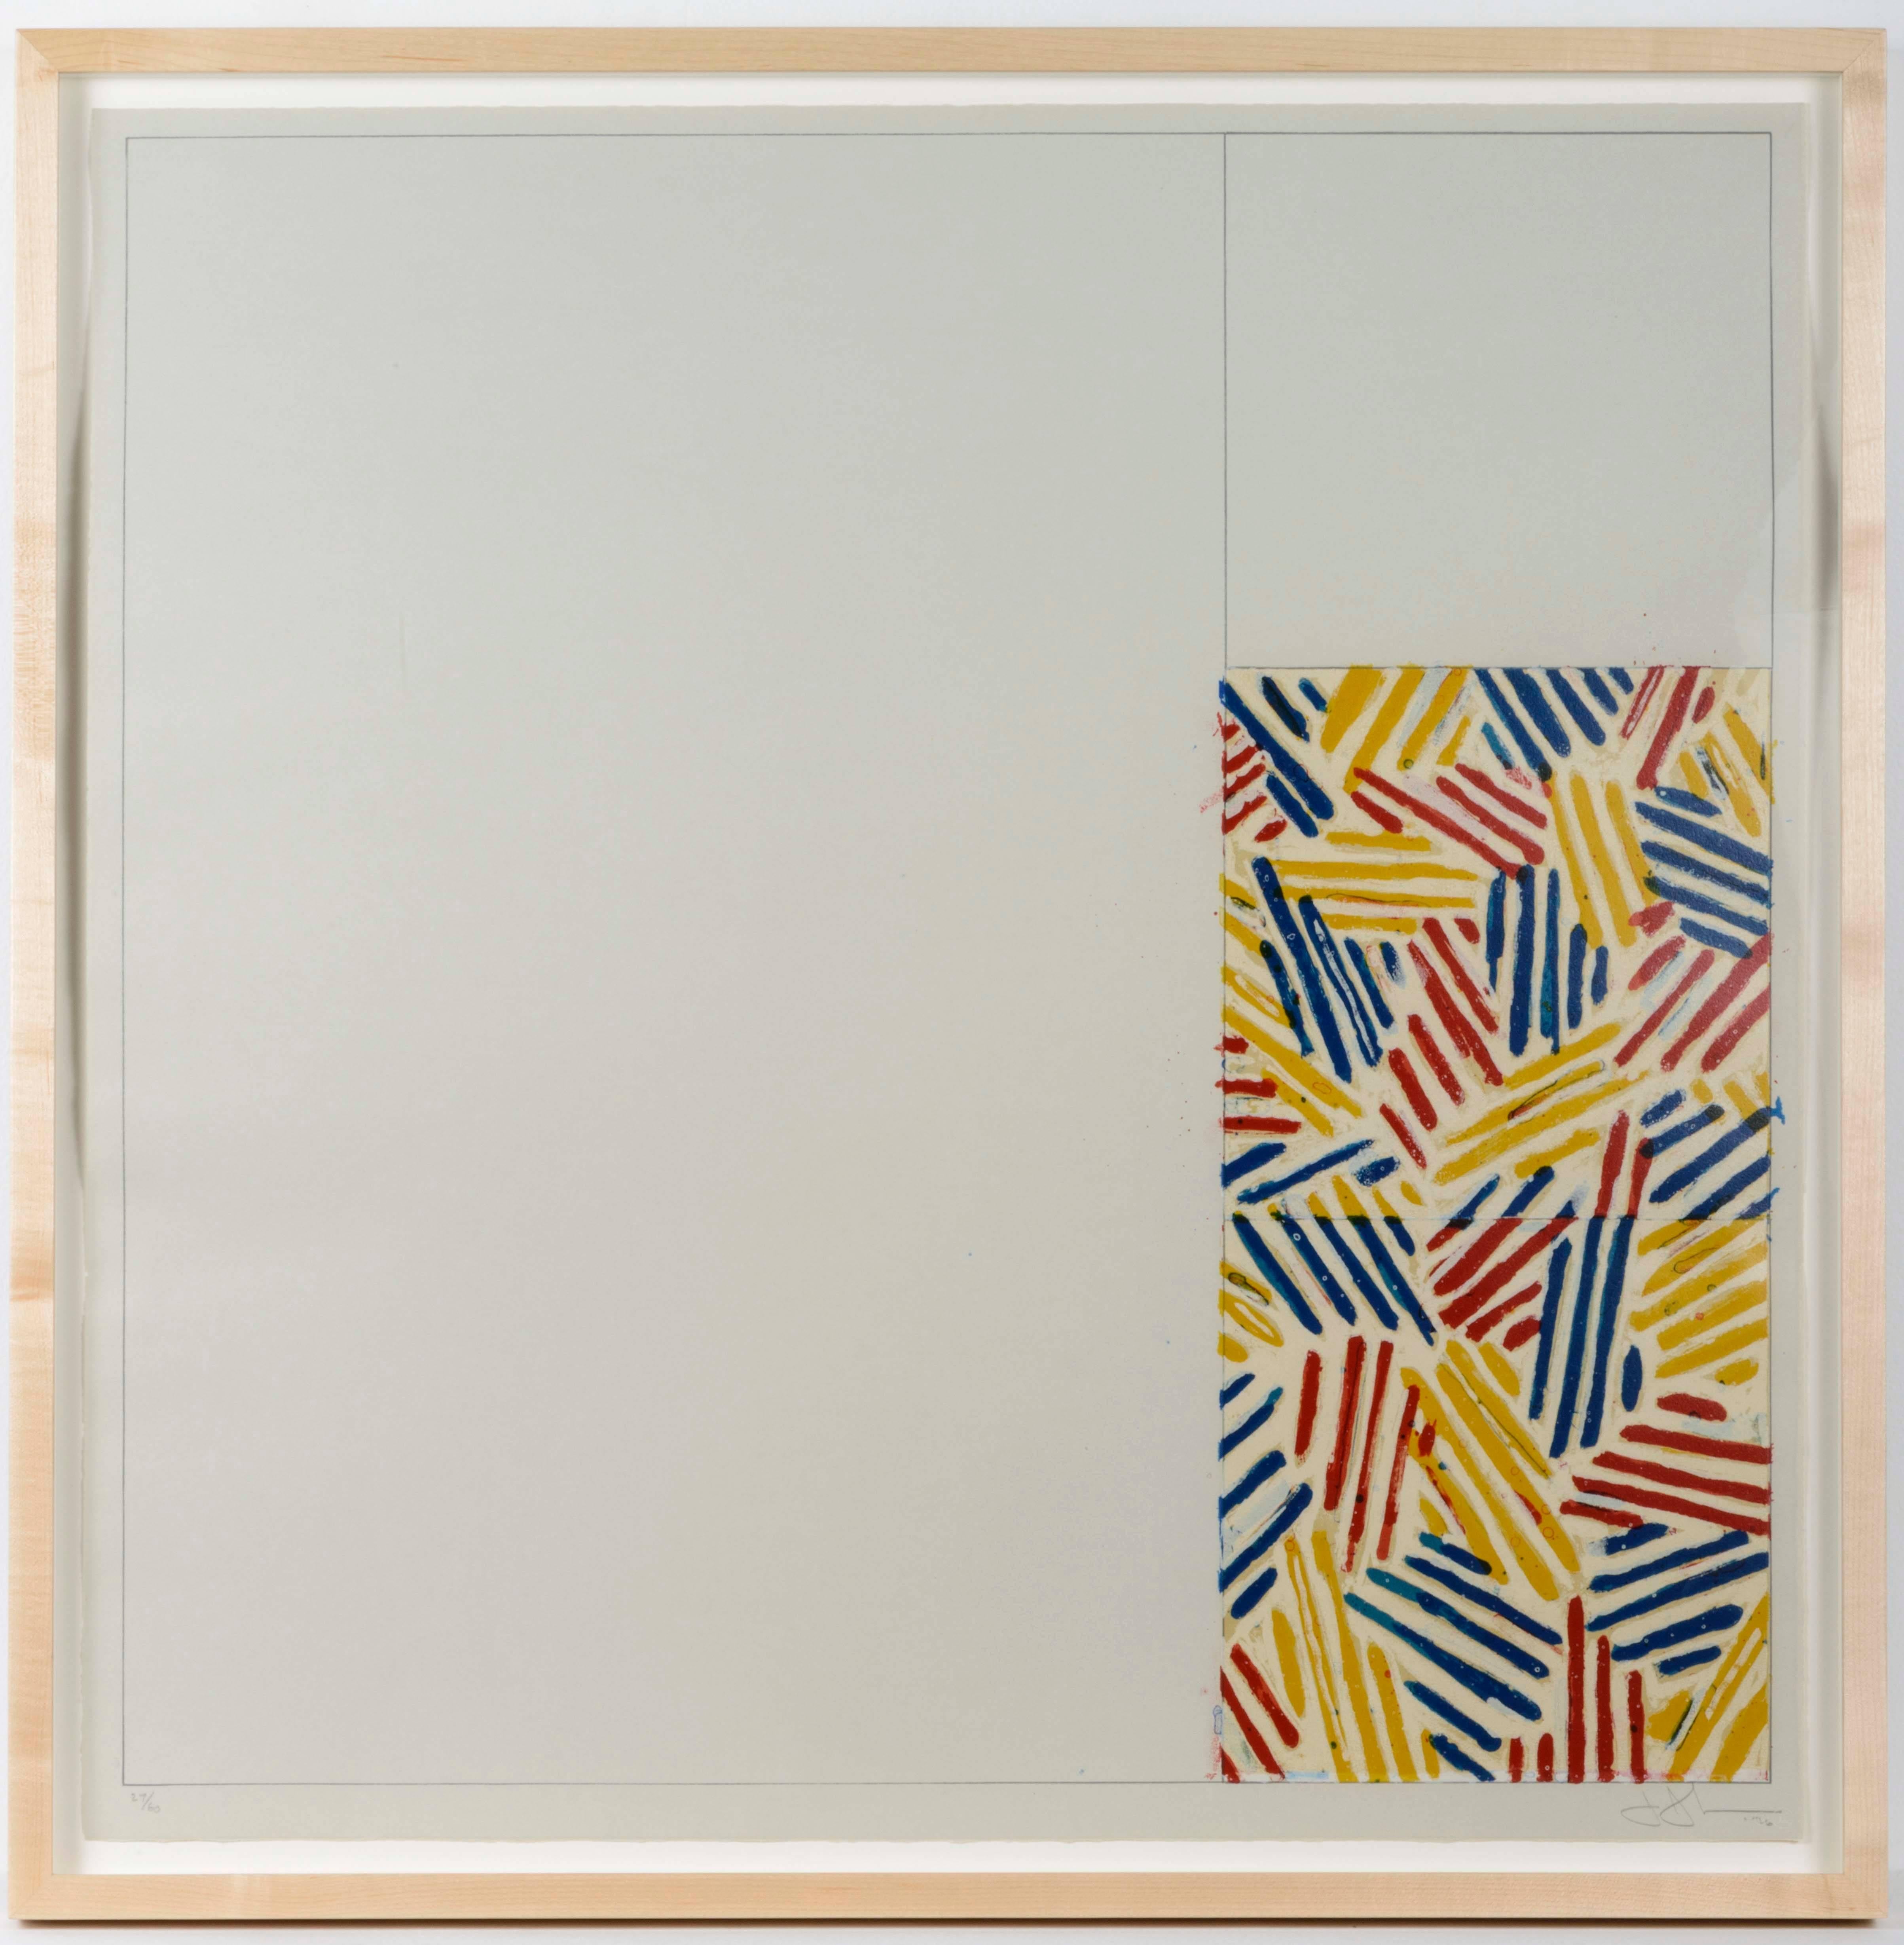 #4 (After Untitled 1975) - Contemporary Print by Jasper Johns